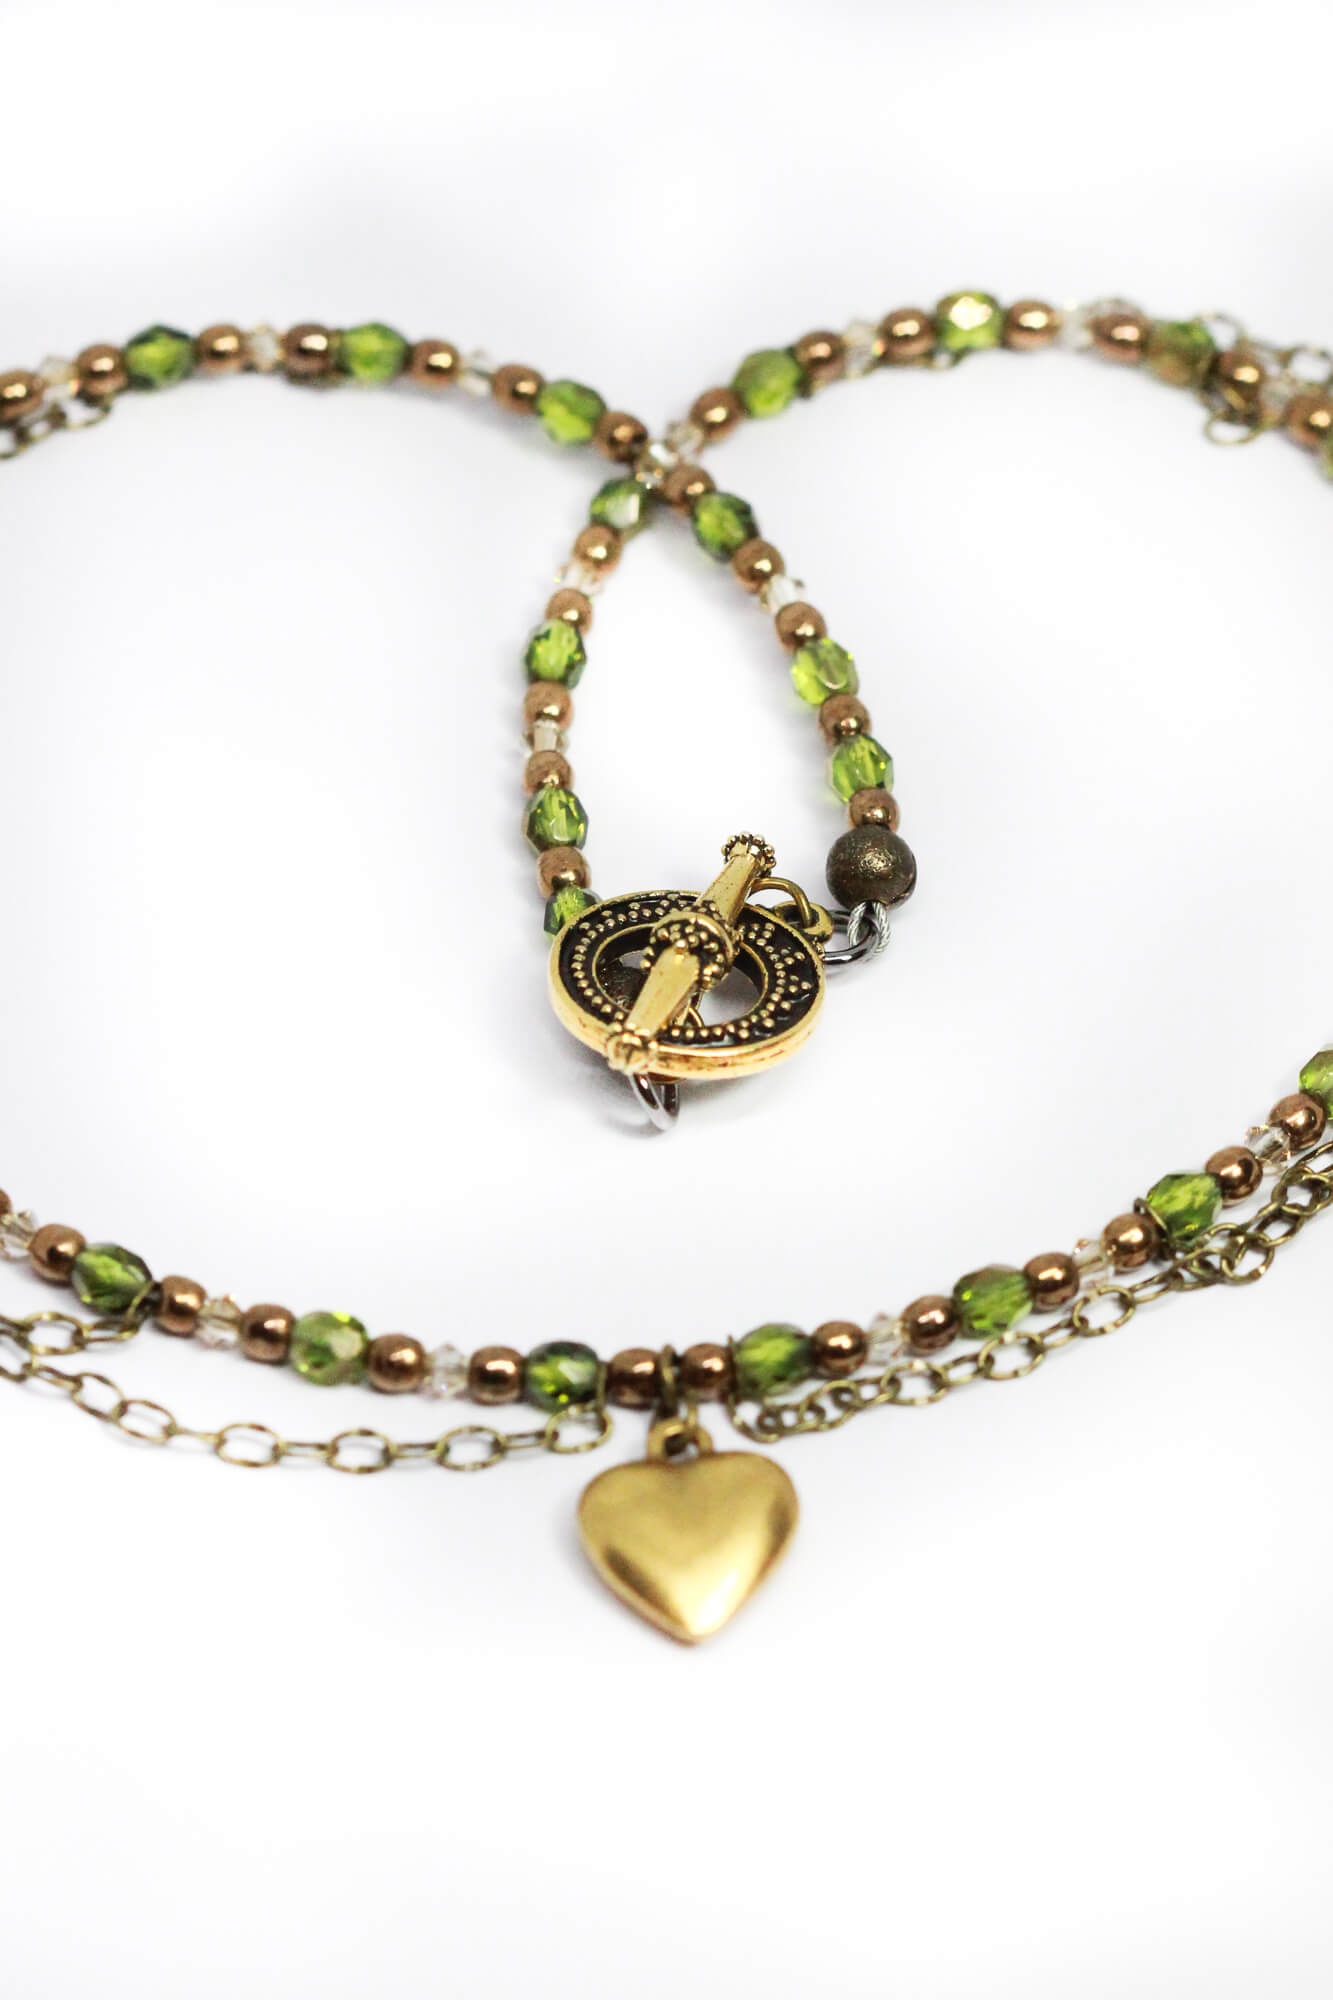 Romantic Handmade Green Necklace with Crystals & Heart Pendant